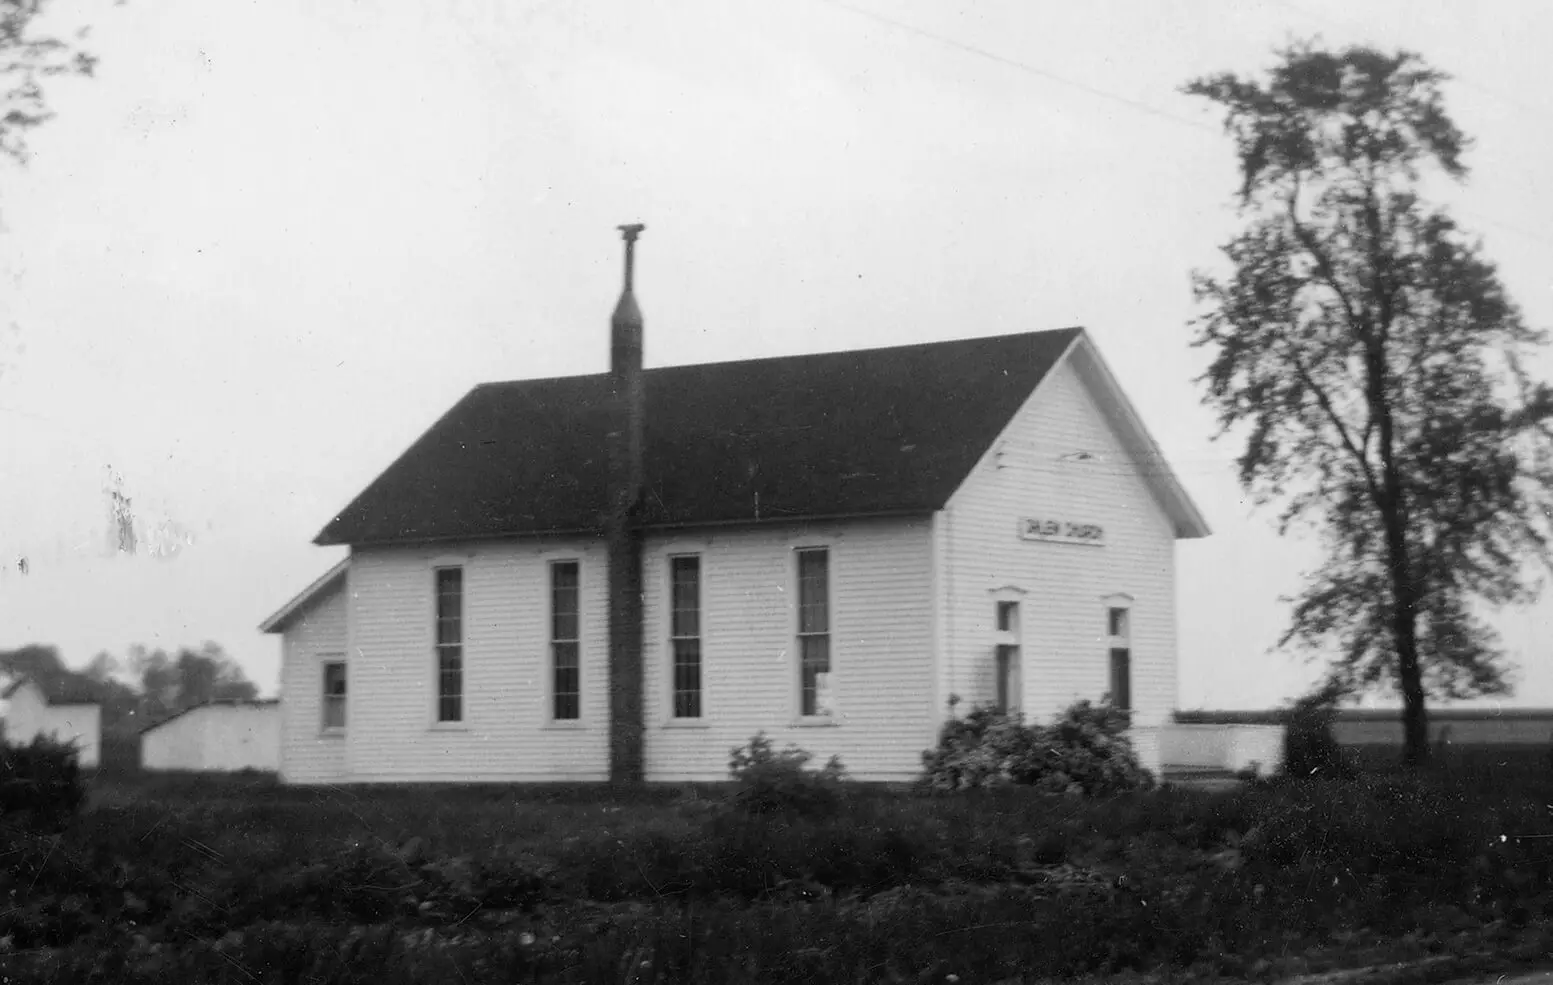 Black and white photo of a single-room wooden church, painted white, with two doors at the front.